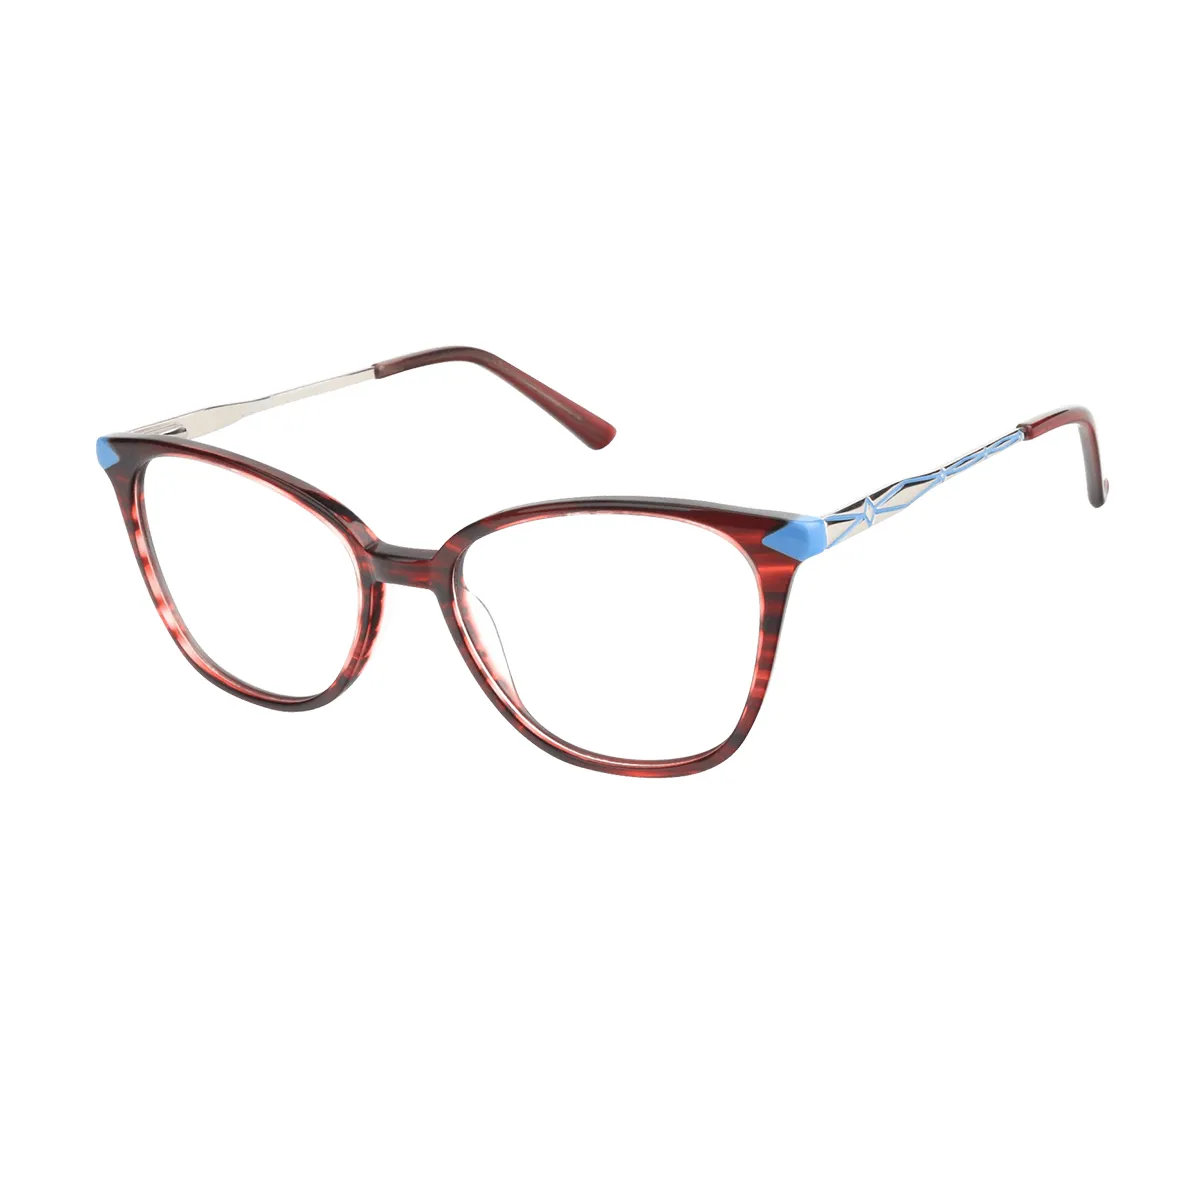 Iona - Square Pink Glasses for Women